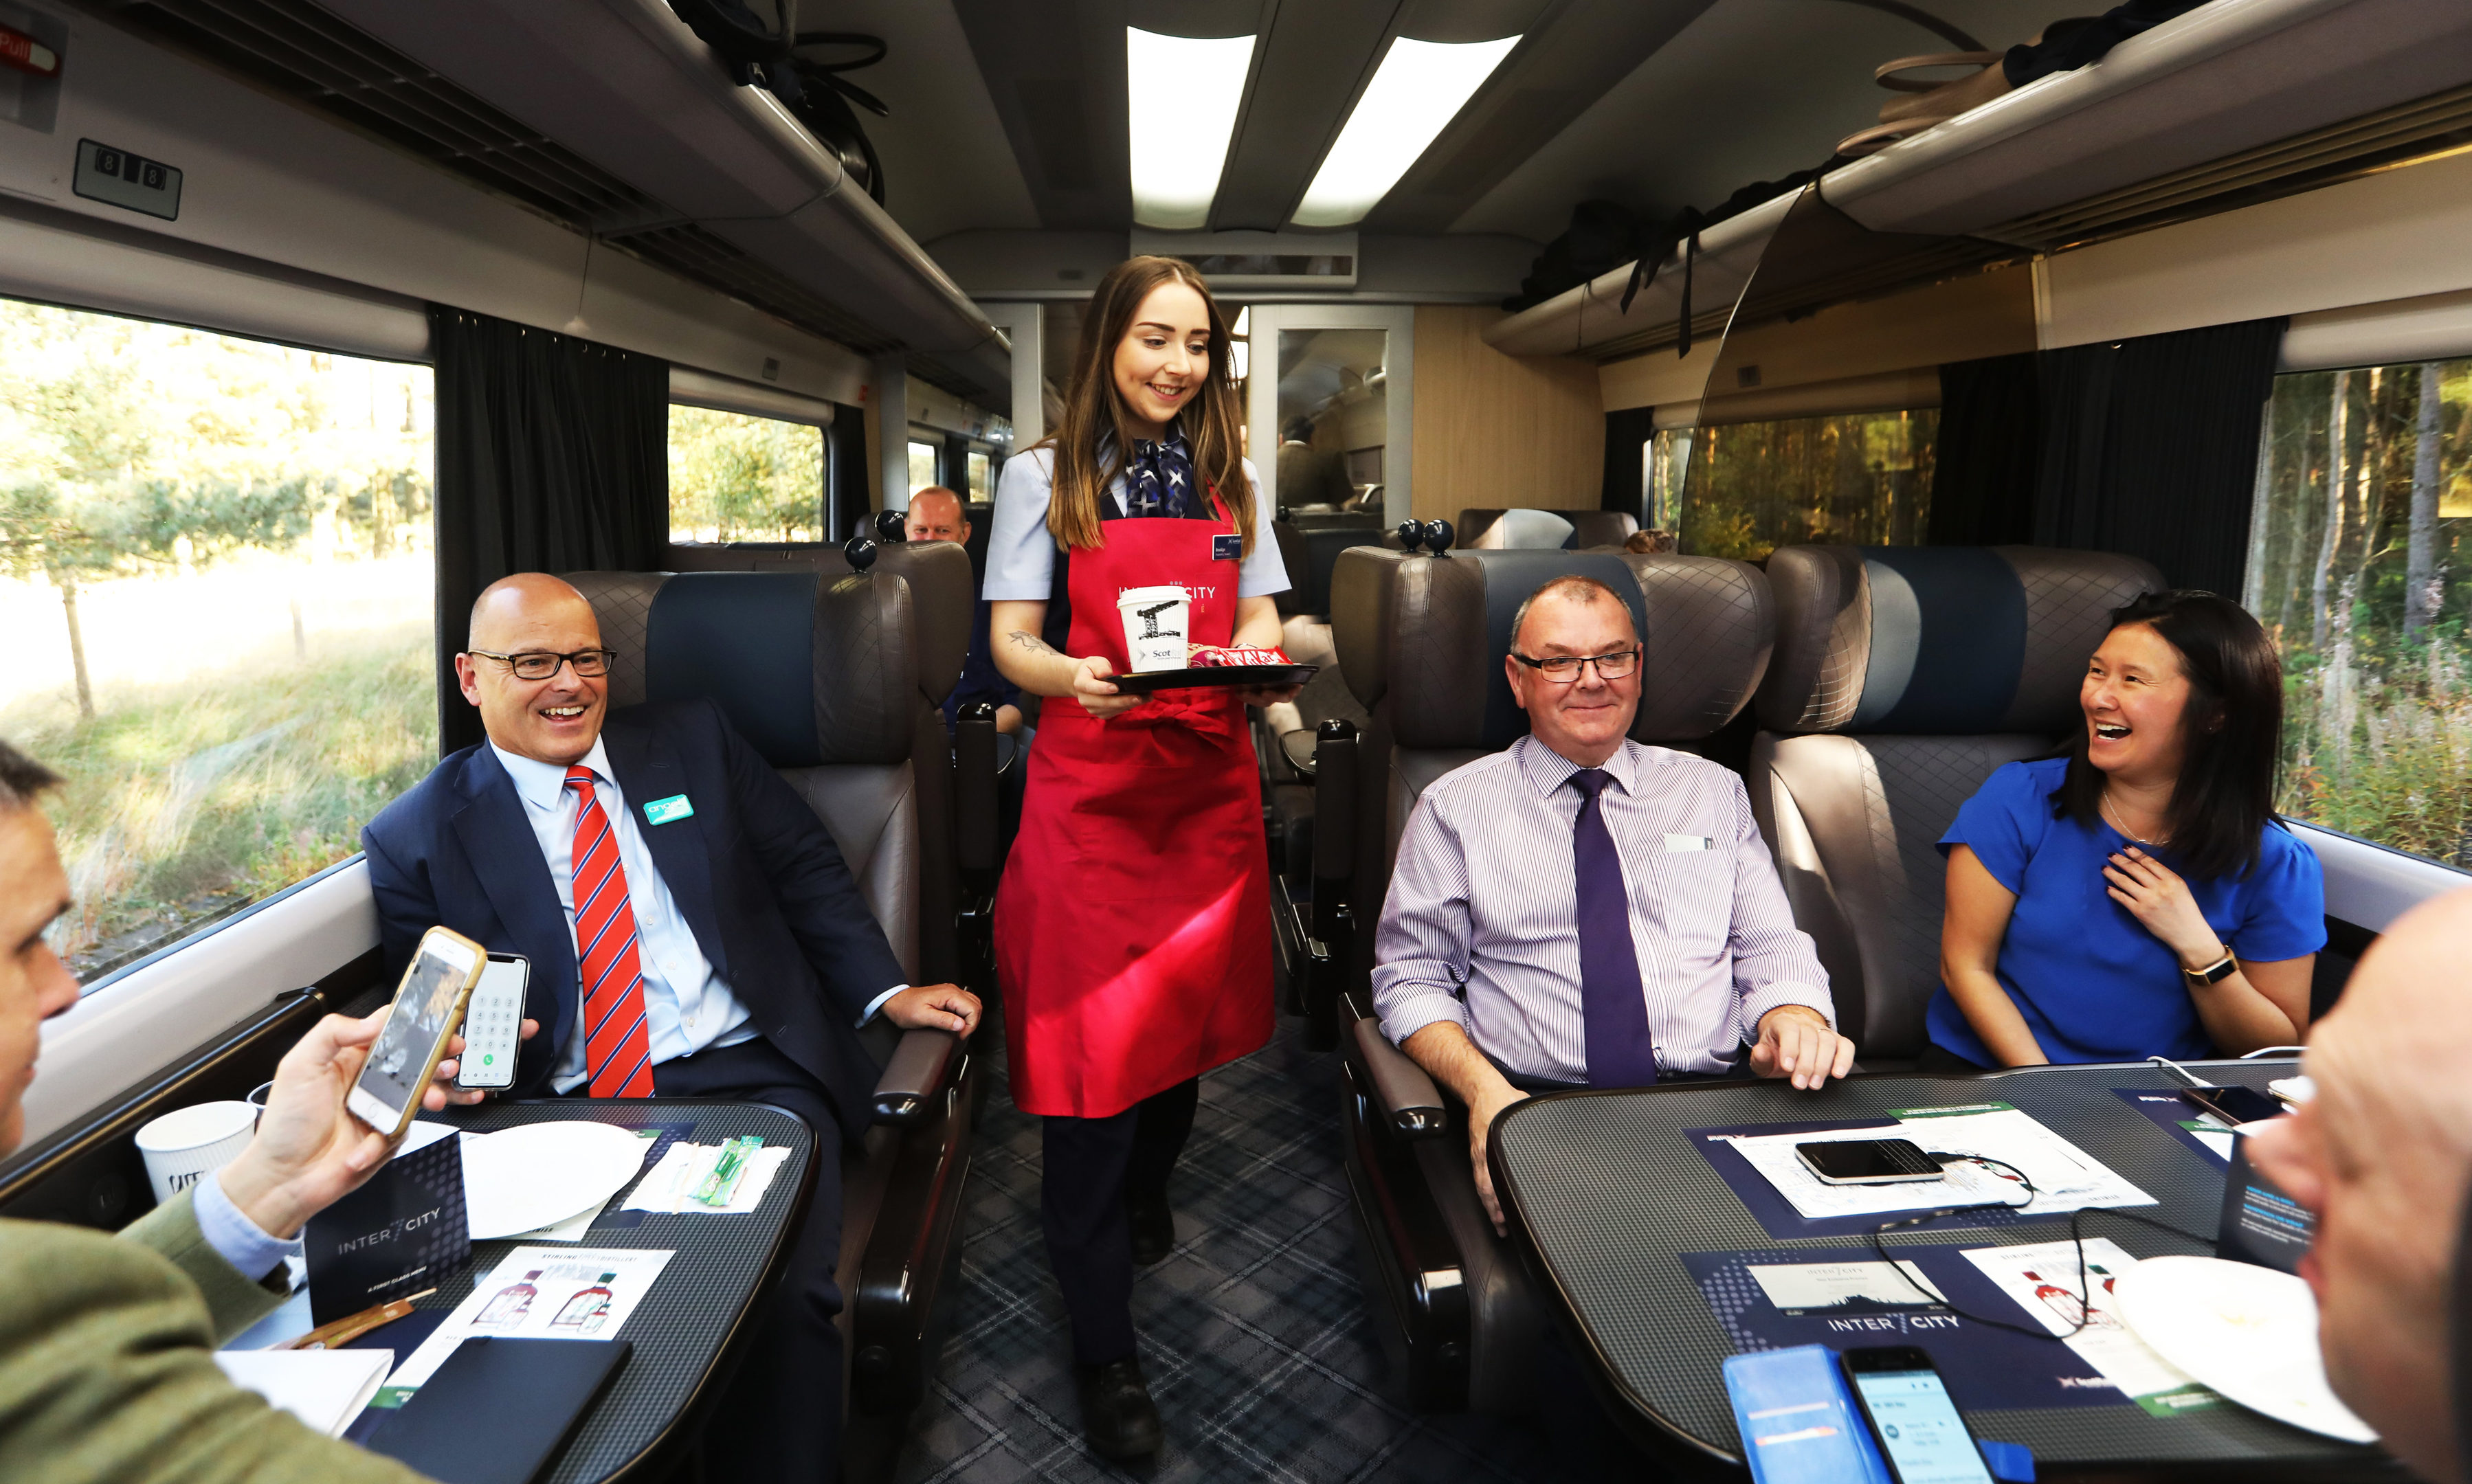 Brooklyn Kerr, a ScotRail hospitality assistant, supplying drinks to the first class cabin.